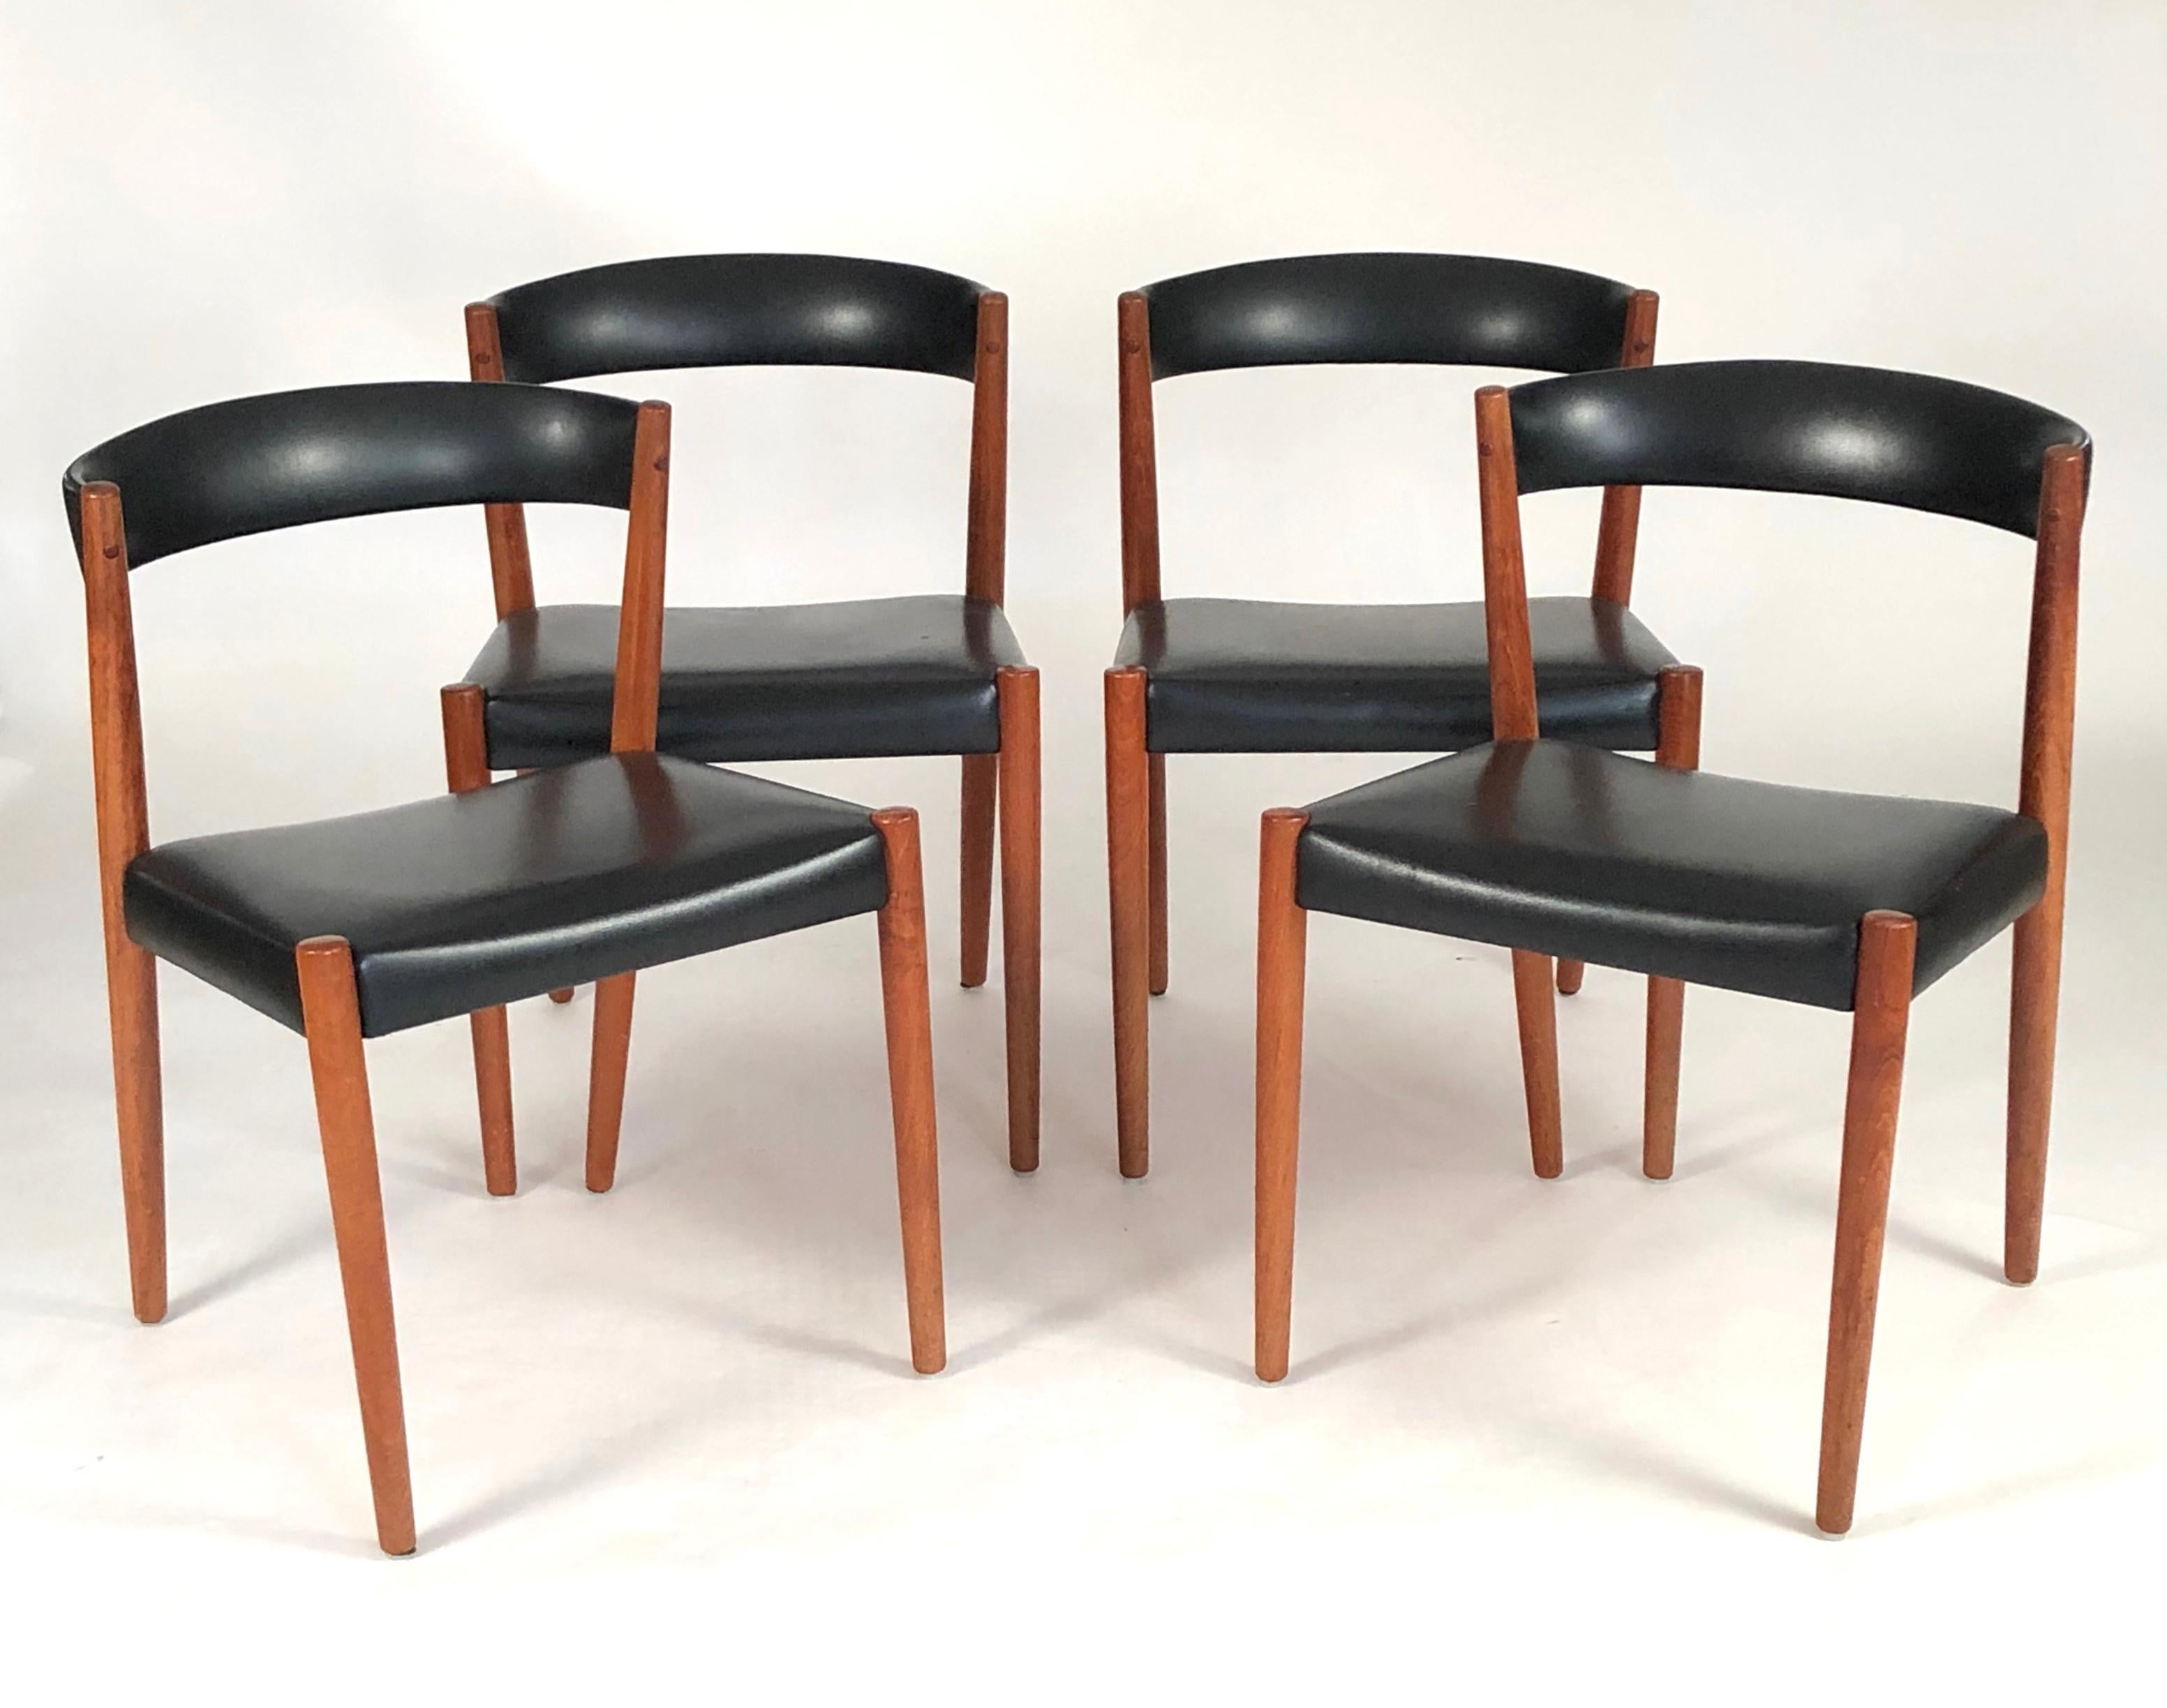 A set of 4 Danish Mid-Century Modern chairs in teak, with curved black leather upholstered backs and seats. Great sculptural form and comfortable. These chairs would also work well at a games table, breakfast table, as side chairs, at a desk or